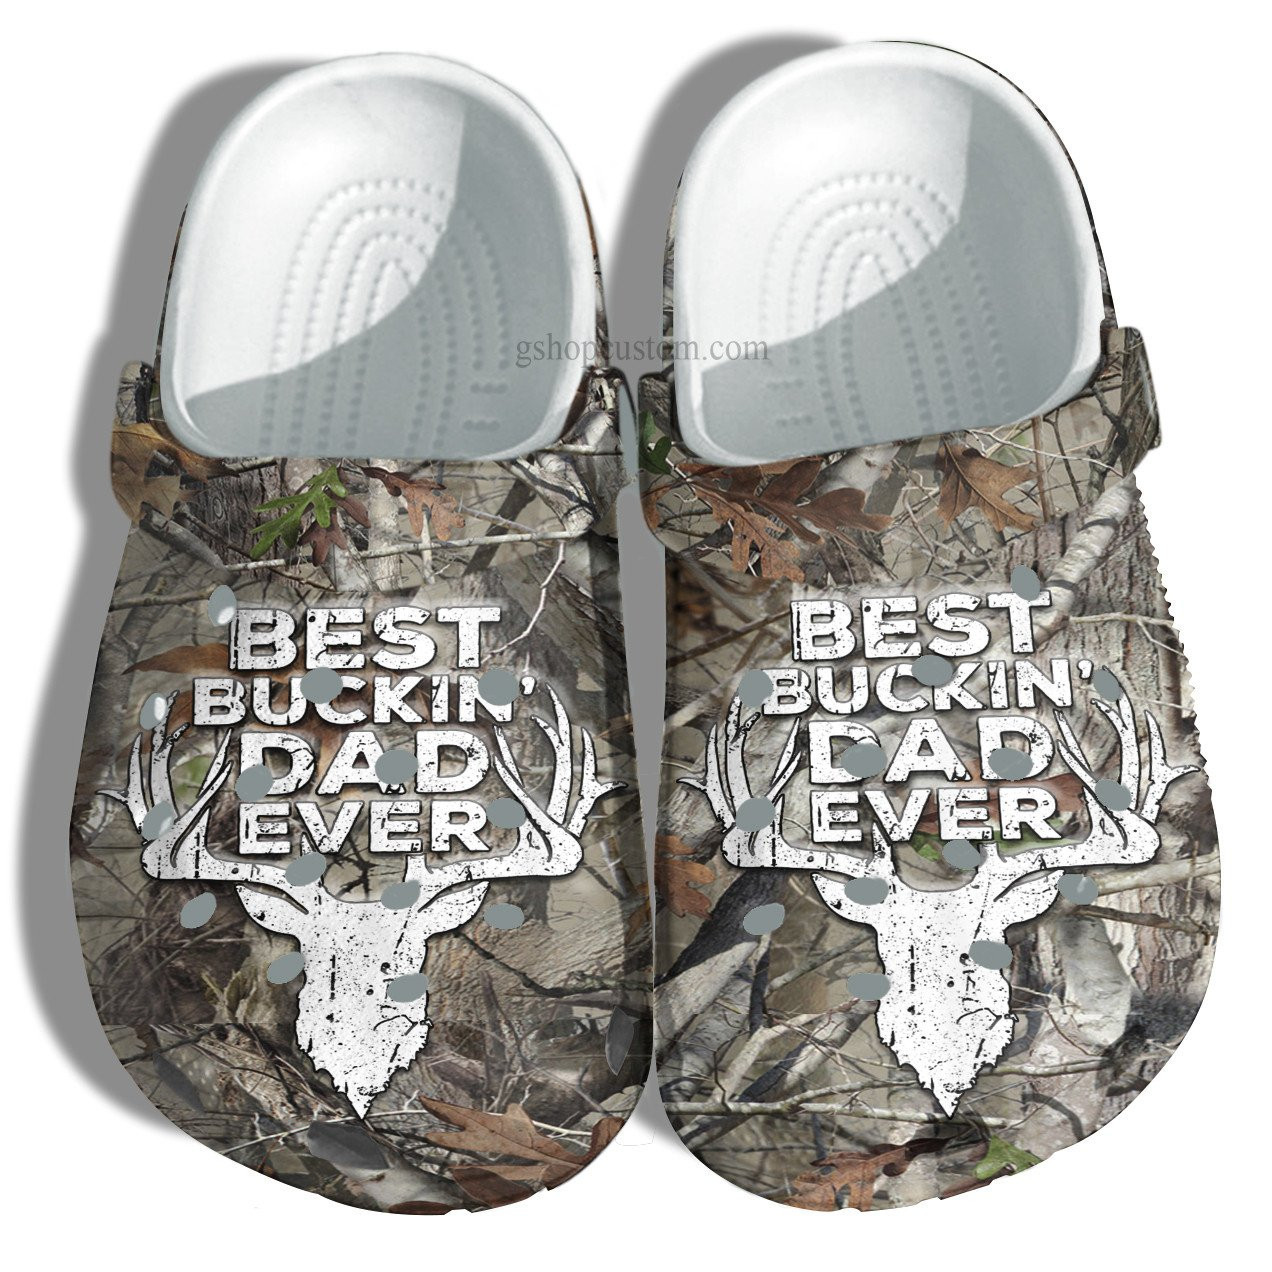 Best Buckin Dad Ever Deer Hunter Croc Crocs Clog Shoes Gift Grandpa Father Day- Deer Hunting Camouflage Army Crocs Clog Shoes